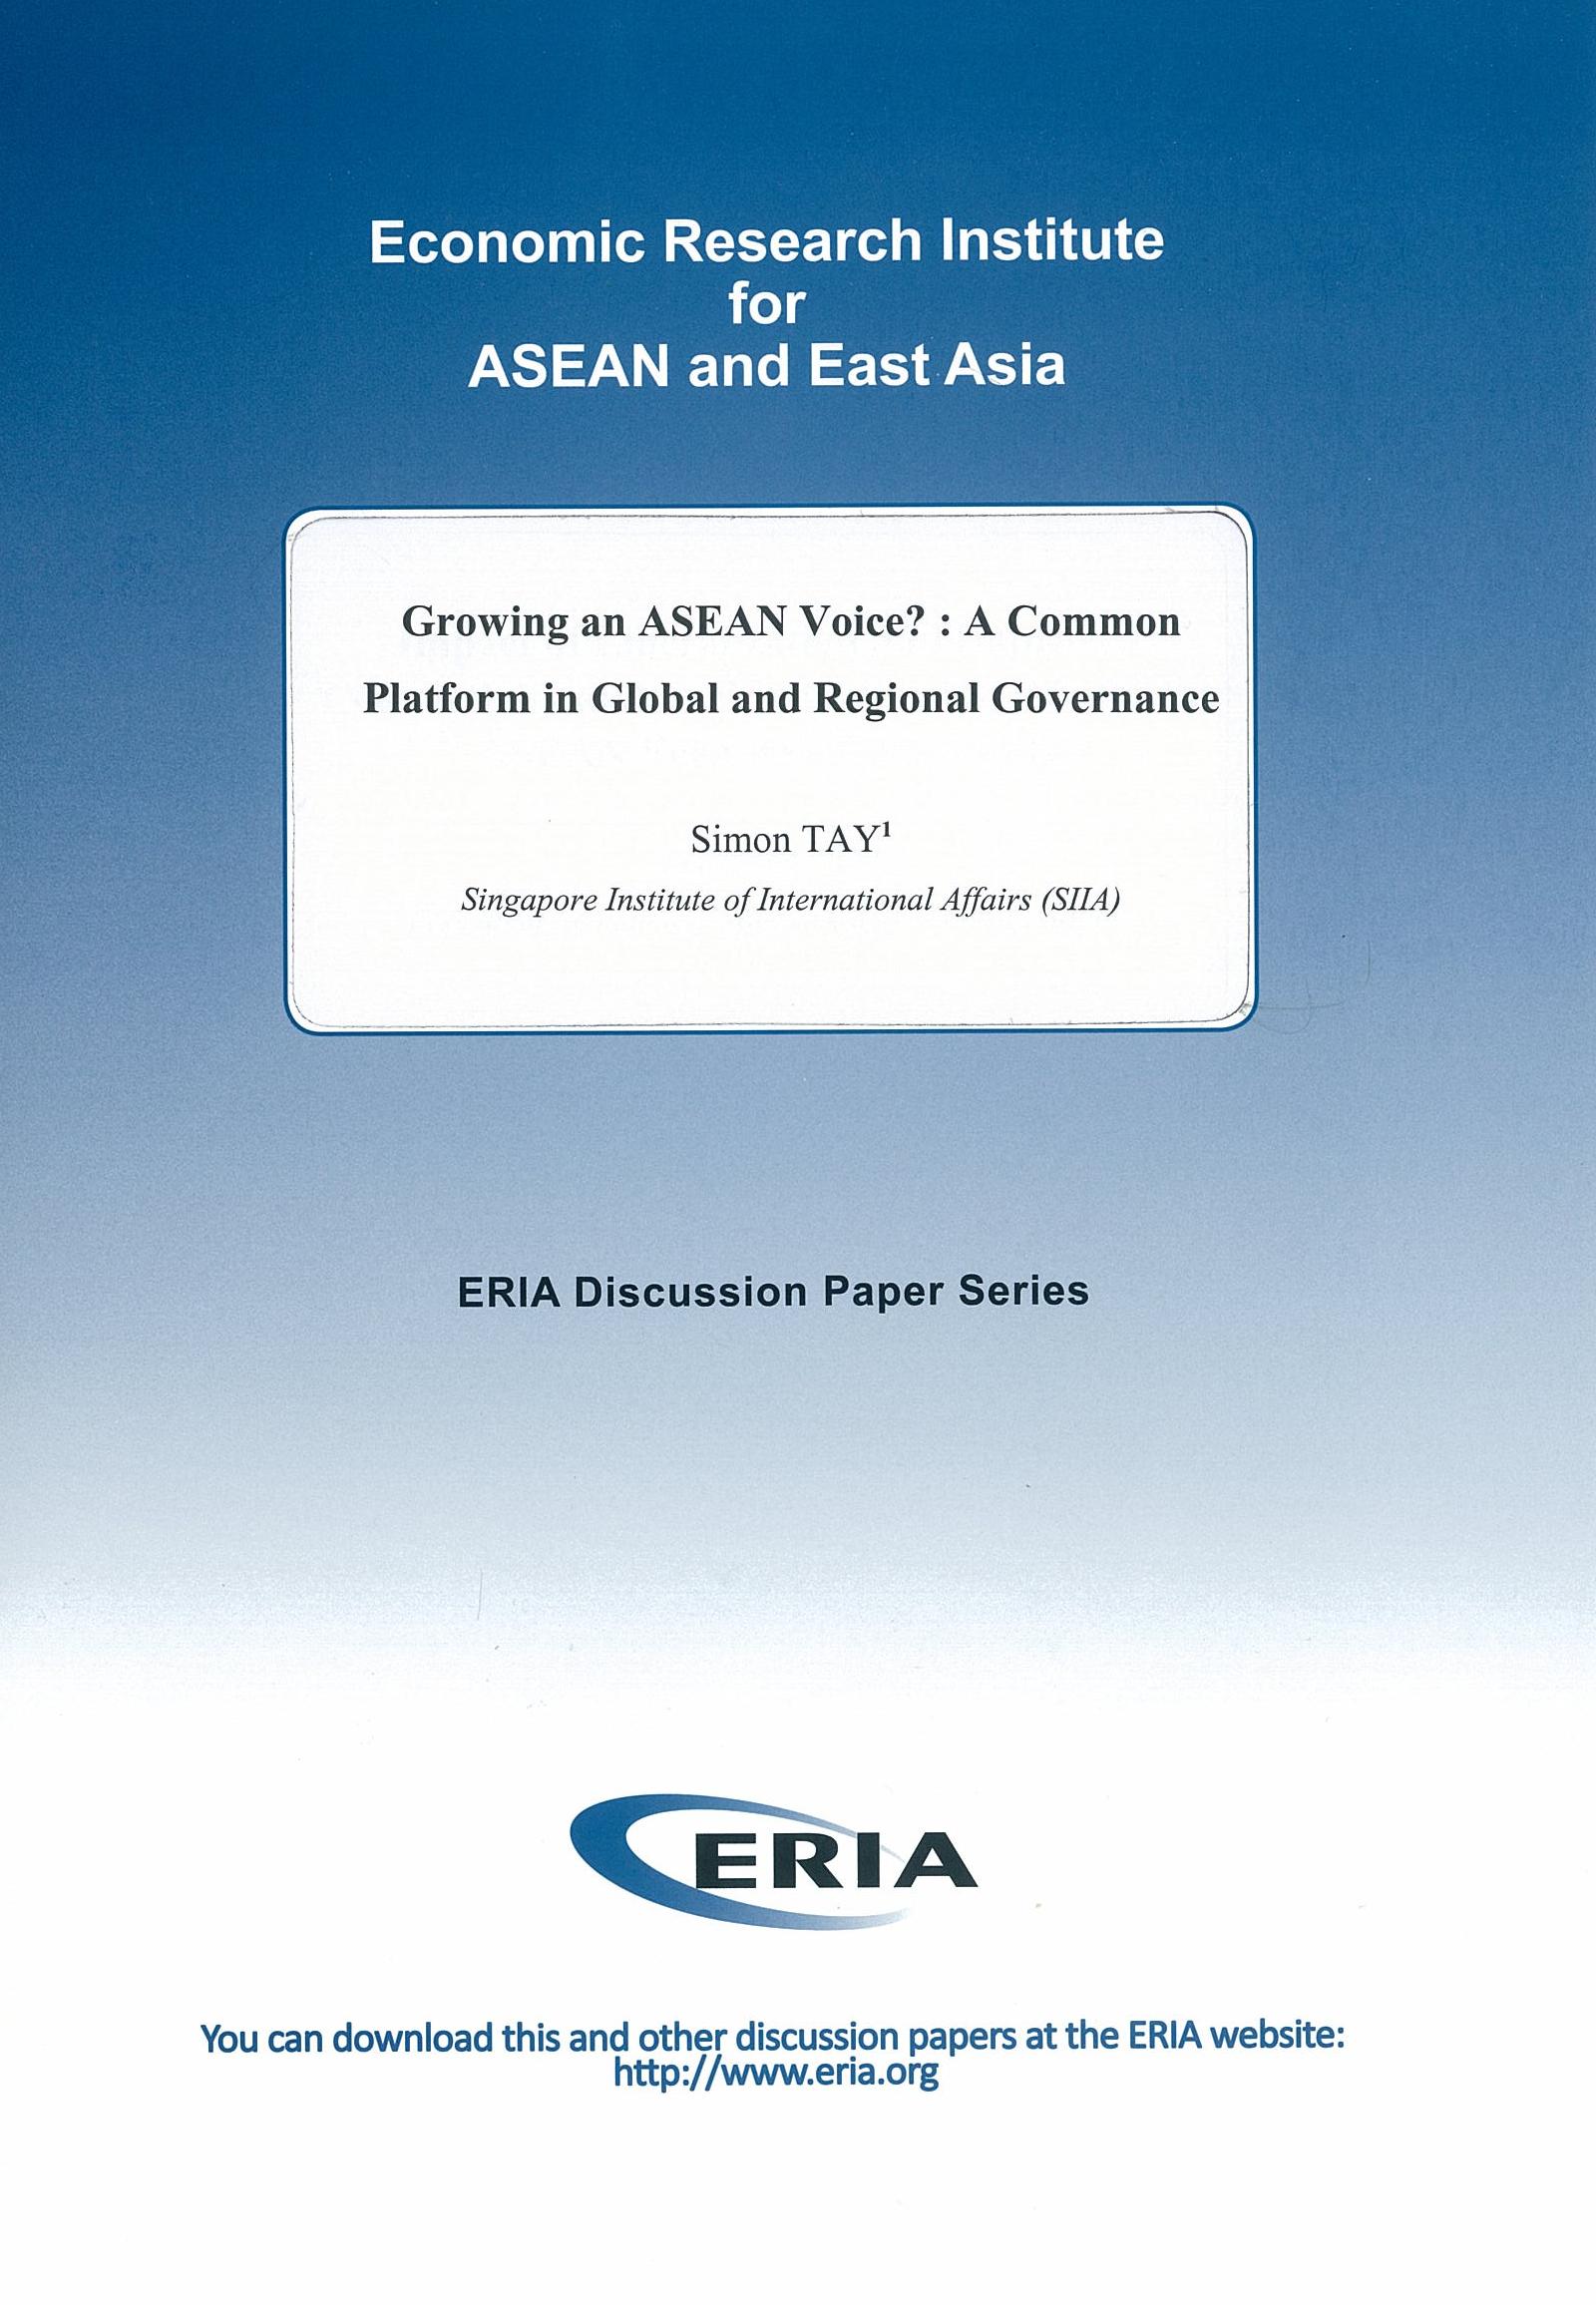 Growing an ASEAN Voice?: A Common Platform in Global and Regional Governance